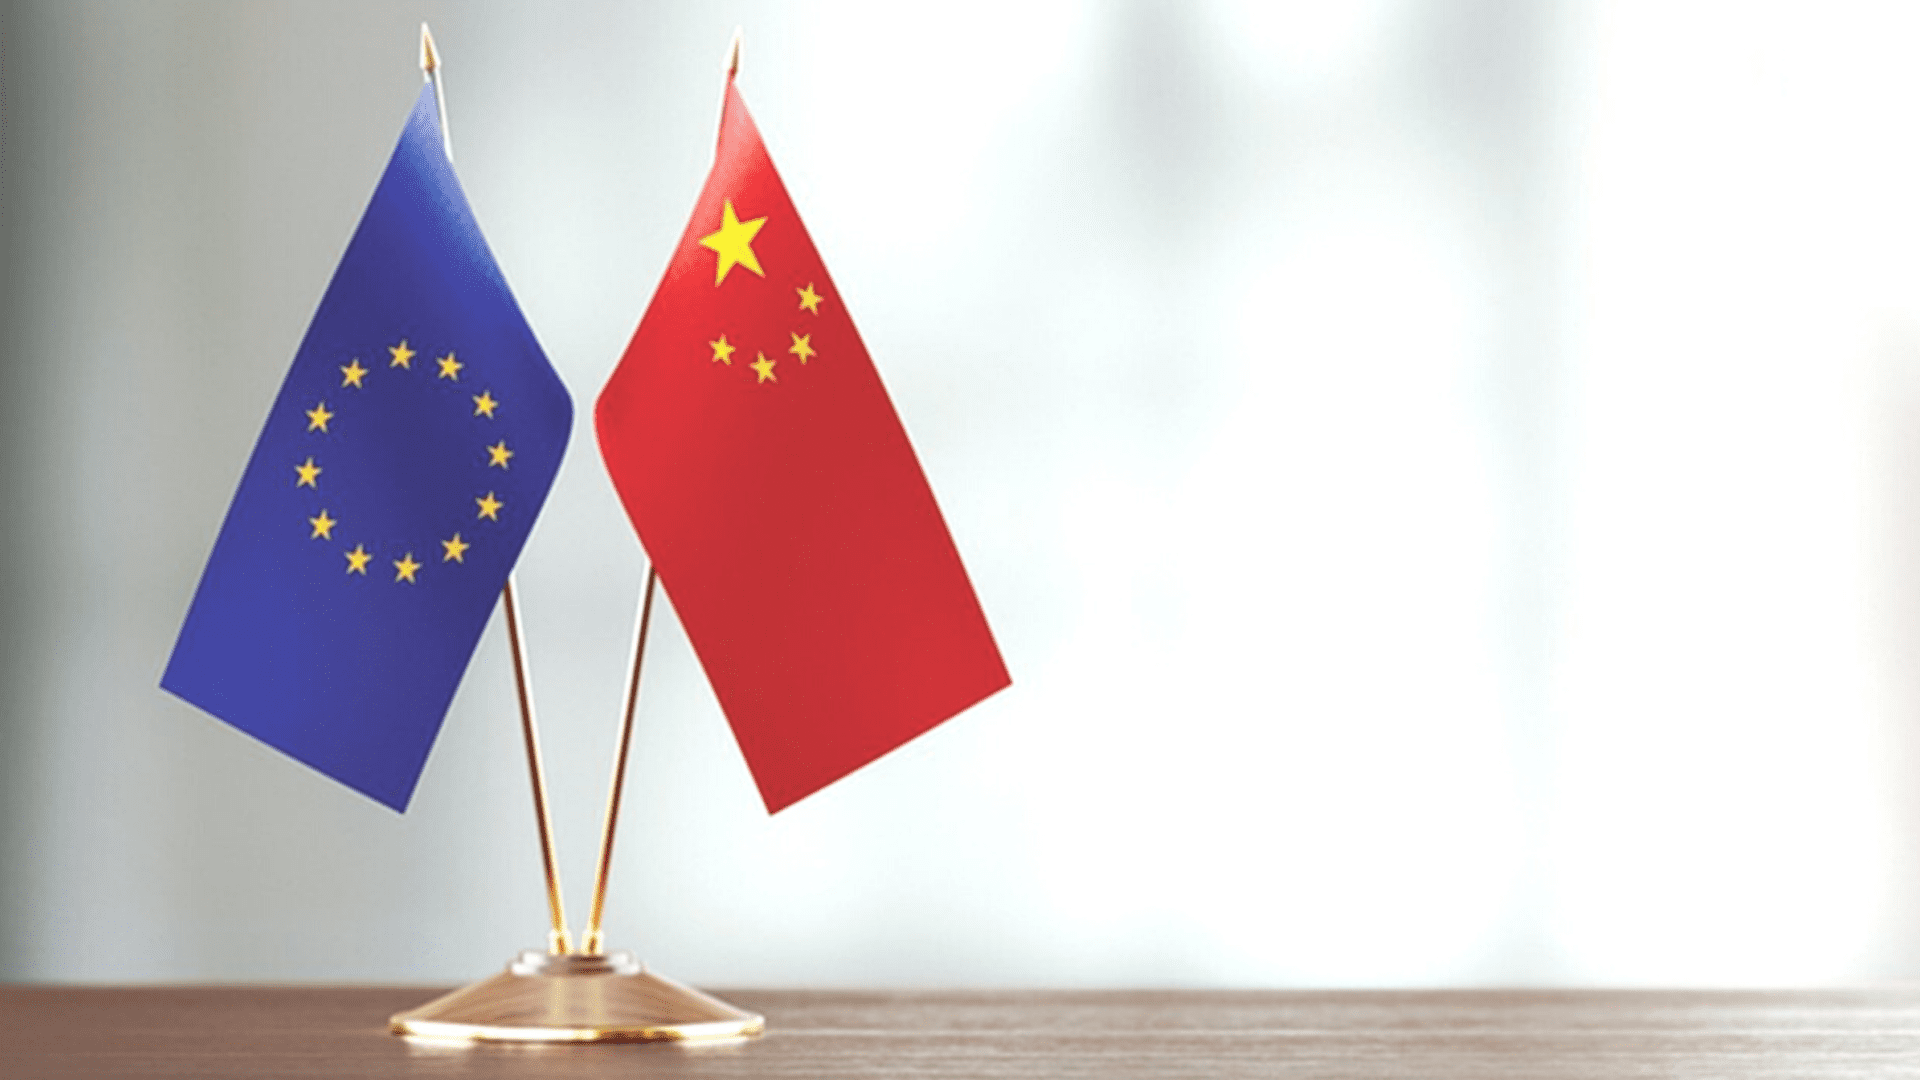 EU and Chinese flags